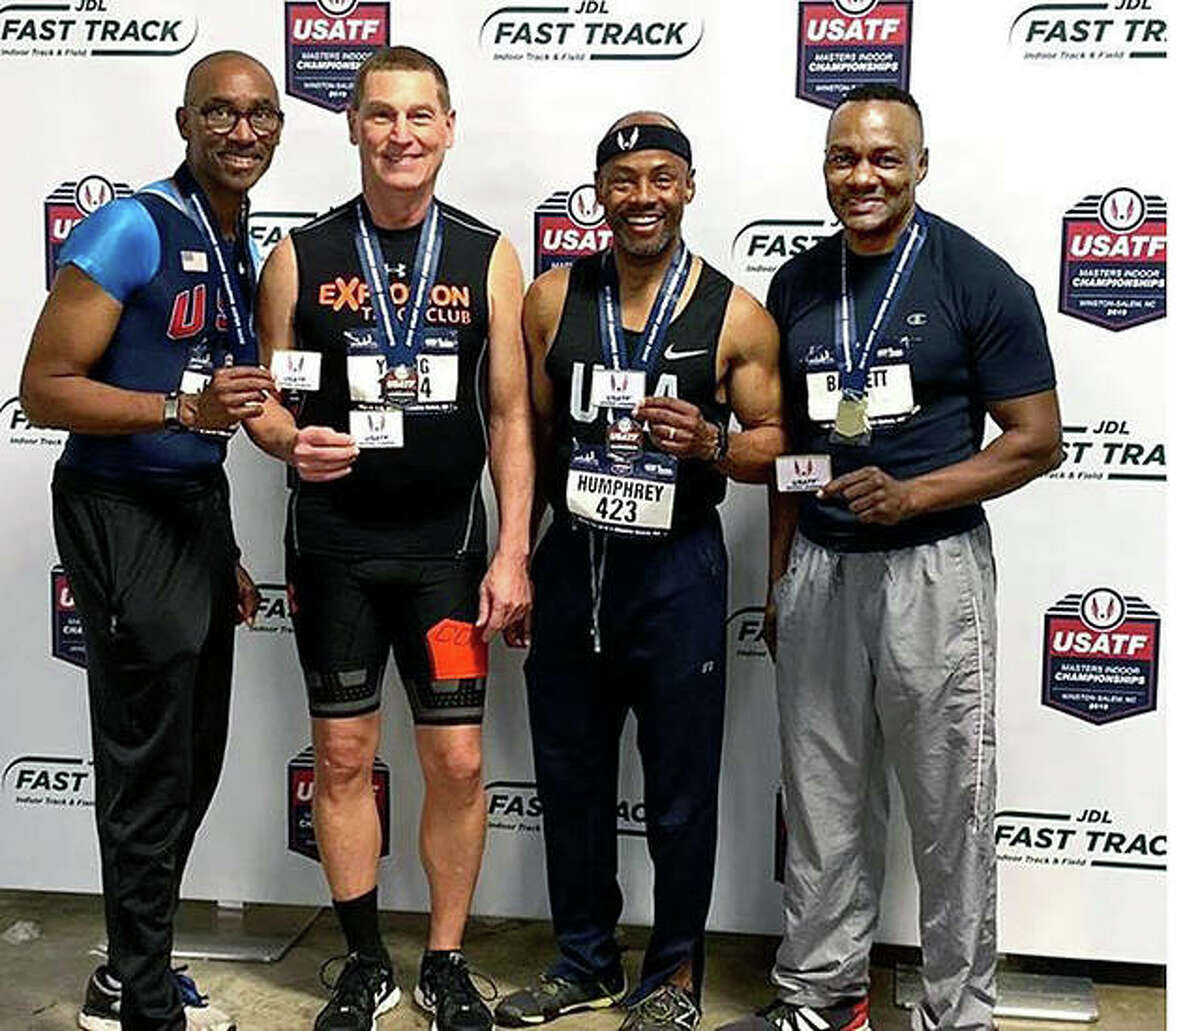 Wood River’s Mike Young, second from left, and the other members of the 4x200 relay men’s 55-59 USATF Masters National Champions after receiving their gold medals at the Masters USATF National Championships in Winston-Salem, North Carolina. From left: Michael D. Jones, Young, Ronald Humphrey and Owen Barrett.